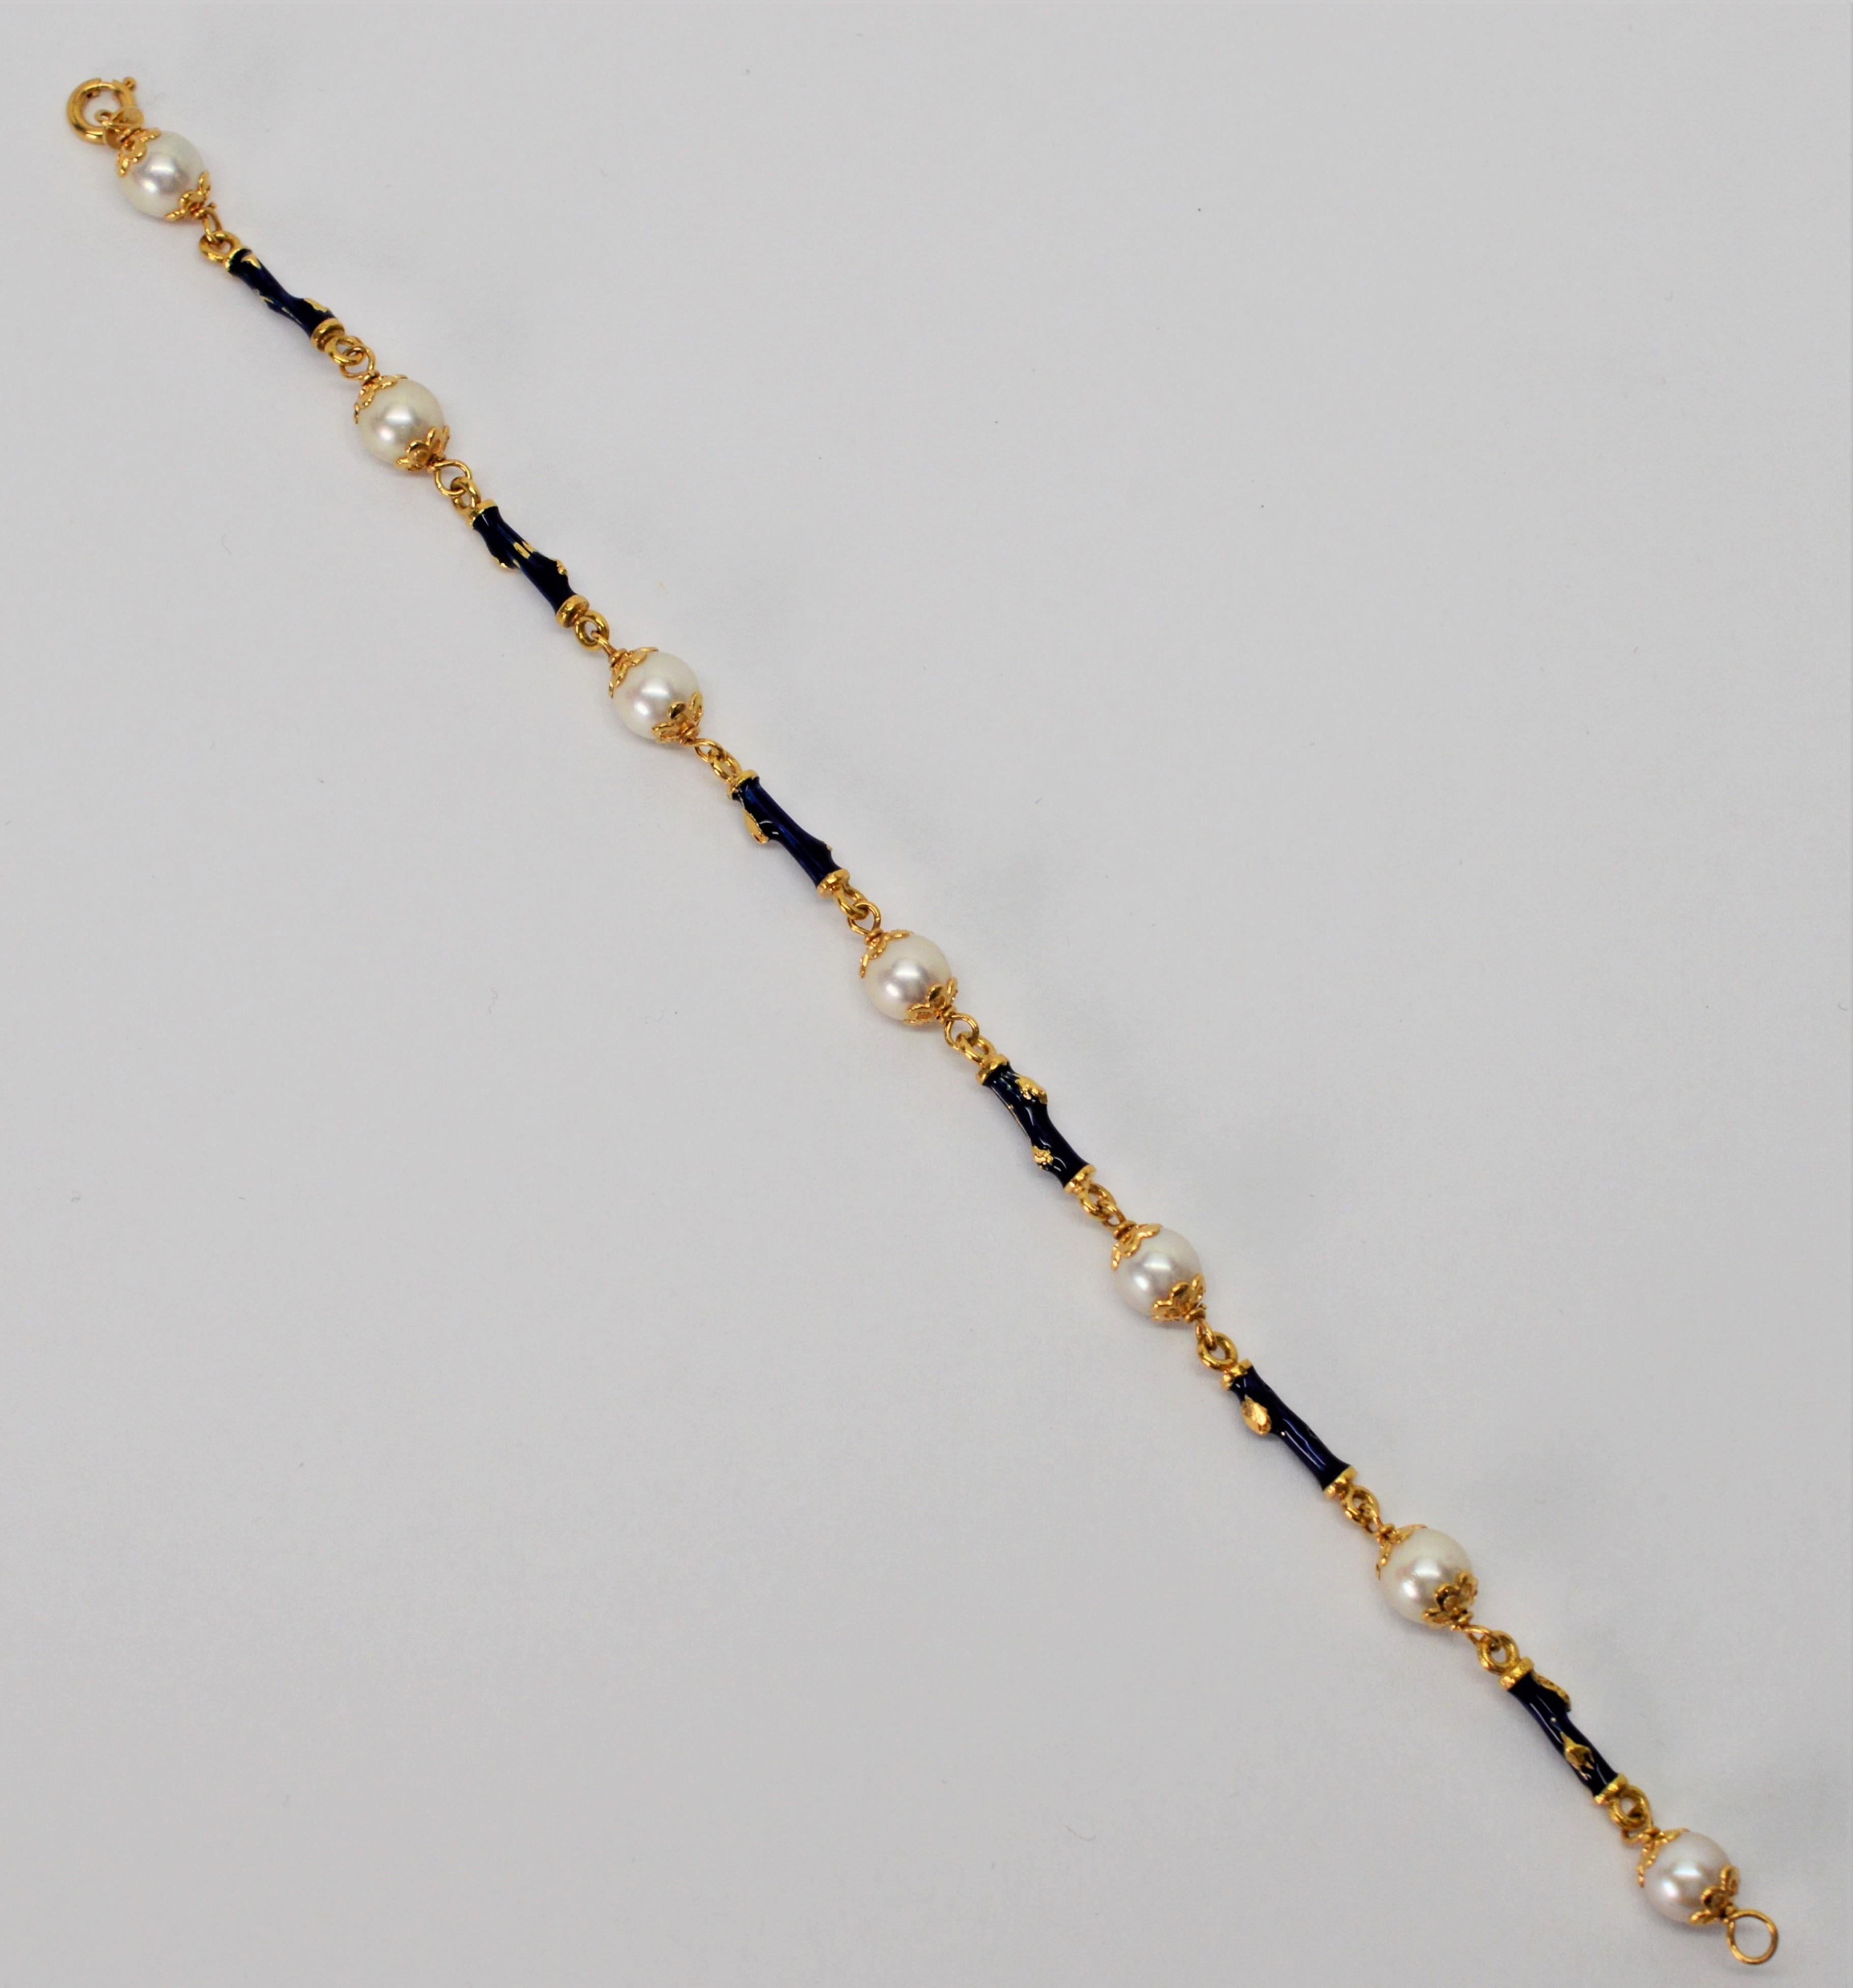 Delicate twig shaped links with blue enamel accents made of eighteen karat yellow gold alternate with creamy white AAA  Akoya pearl buds to create this eight inch (8